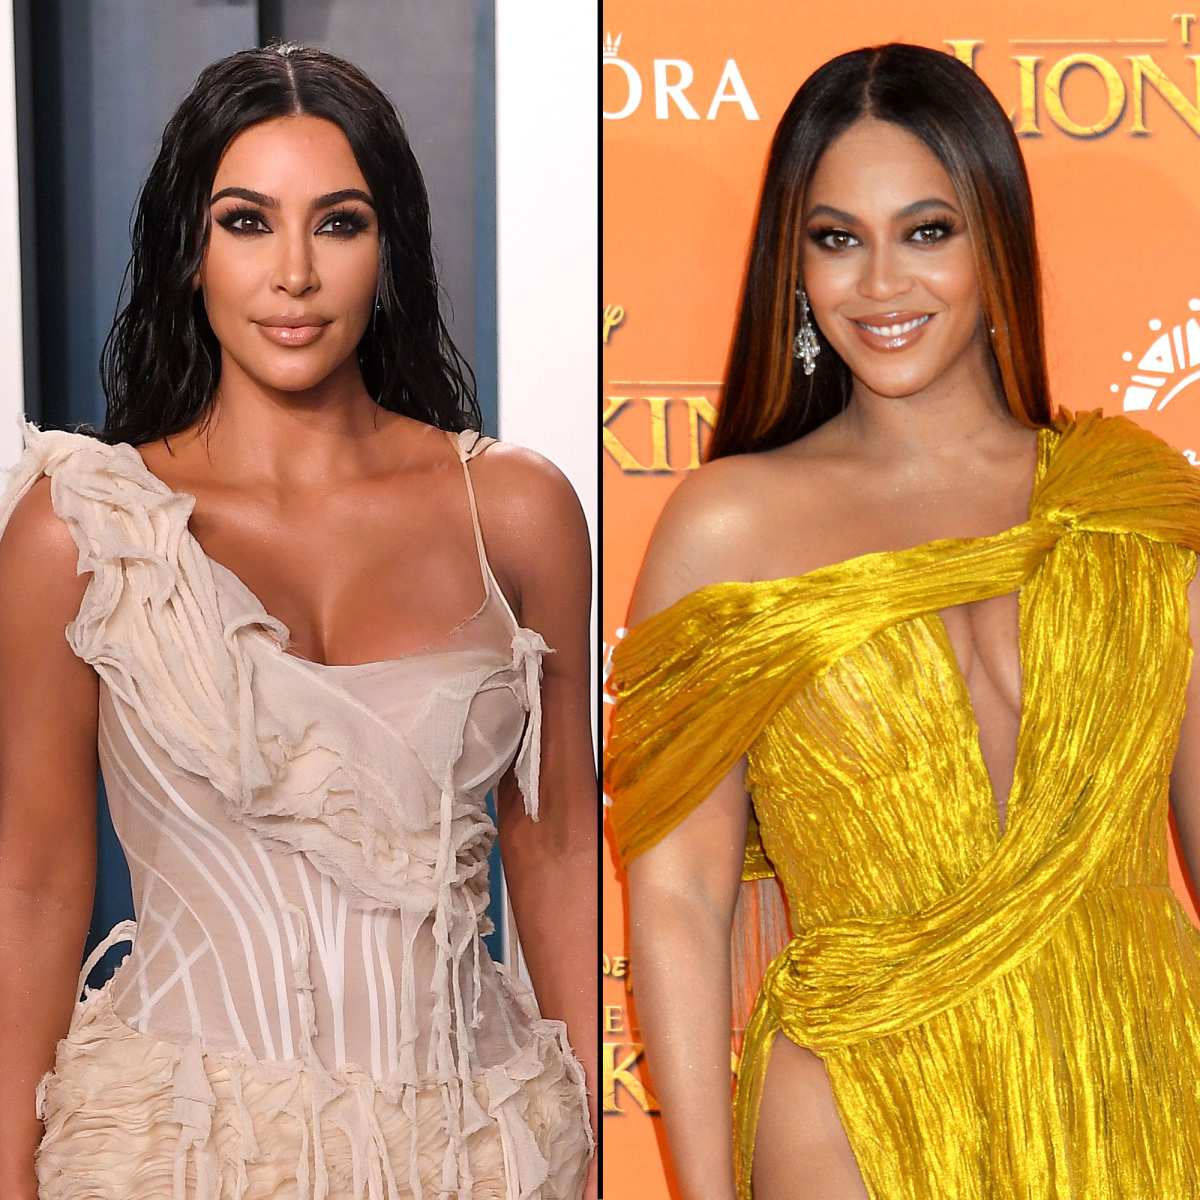 Kim Kardashian Puts Herself on Worst Dressed List for Yellow and